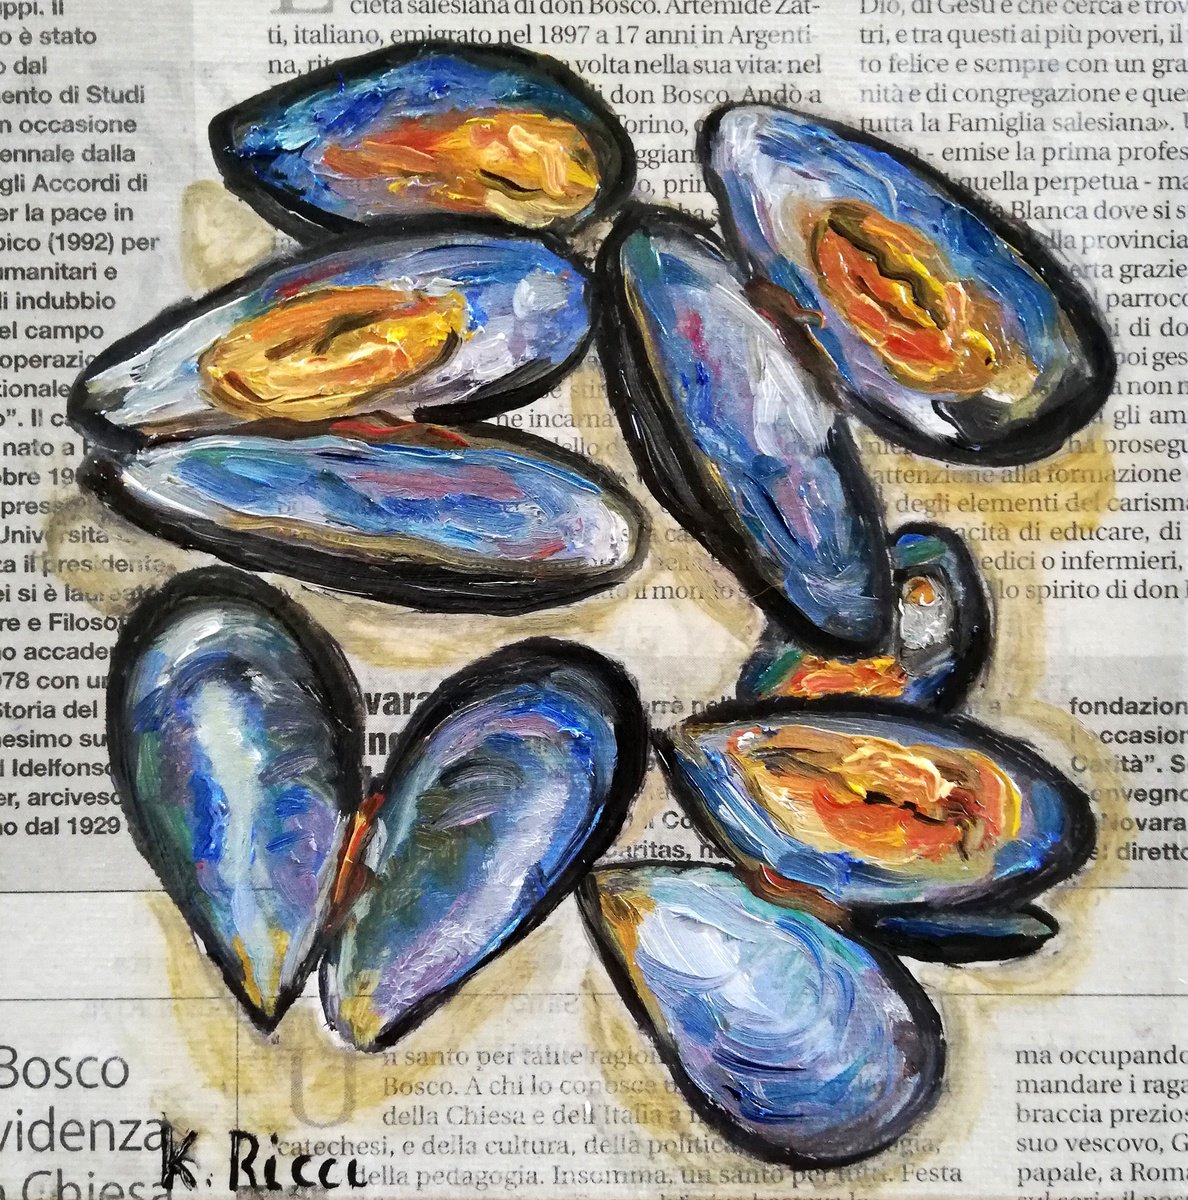 Mussels on Newspaper Original Oil on Canvas Board Painting 6 by 6 inches (15x15 cm) by Katia Ricci